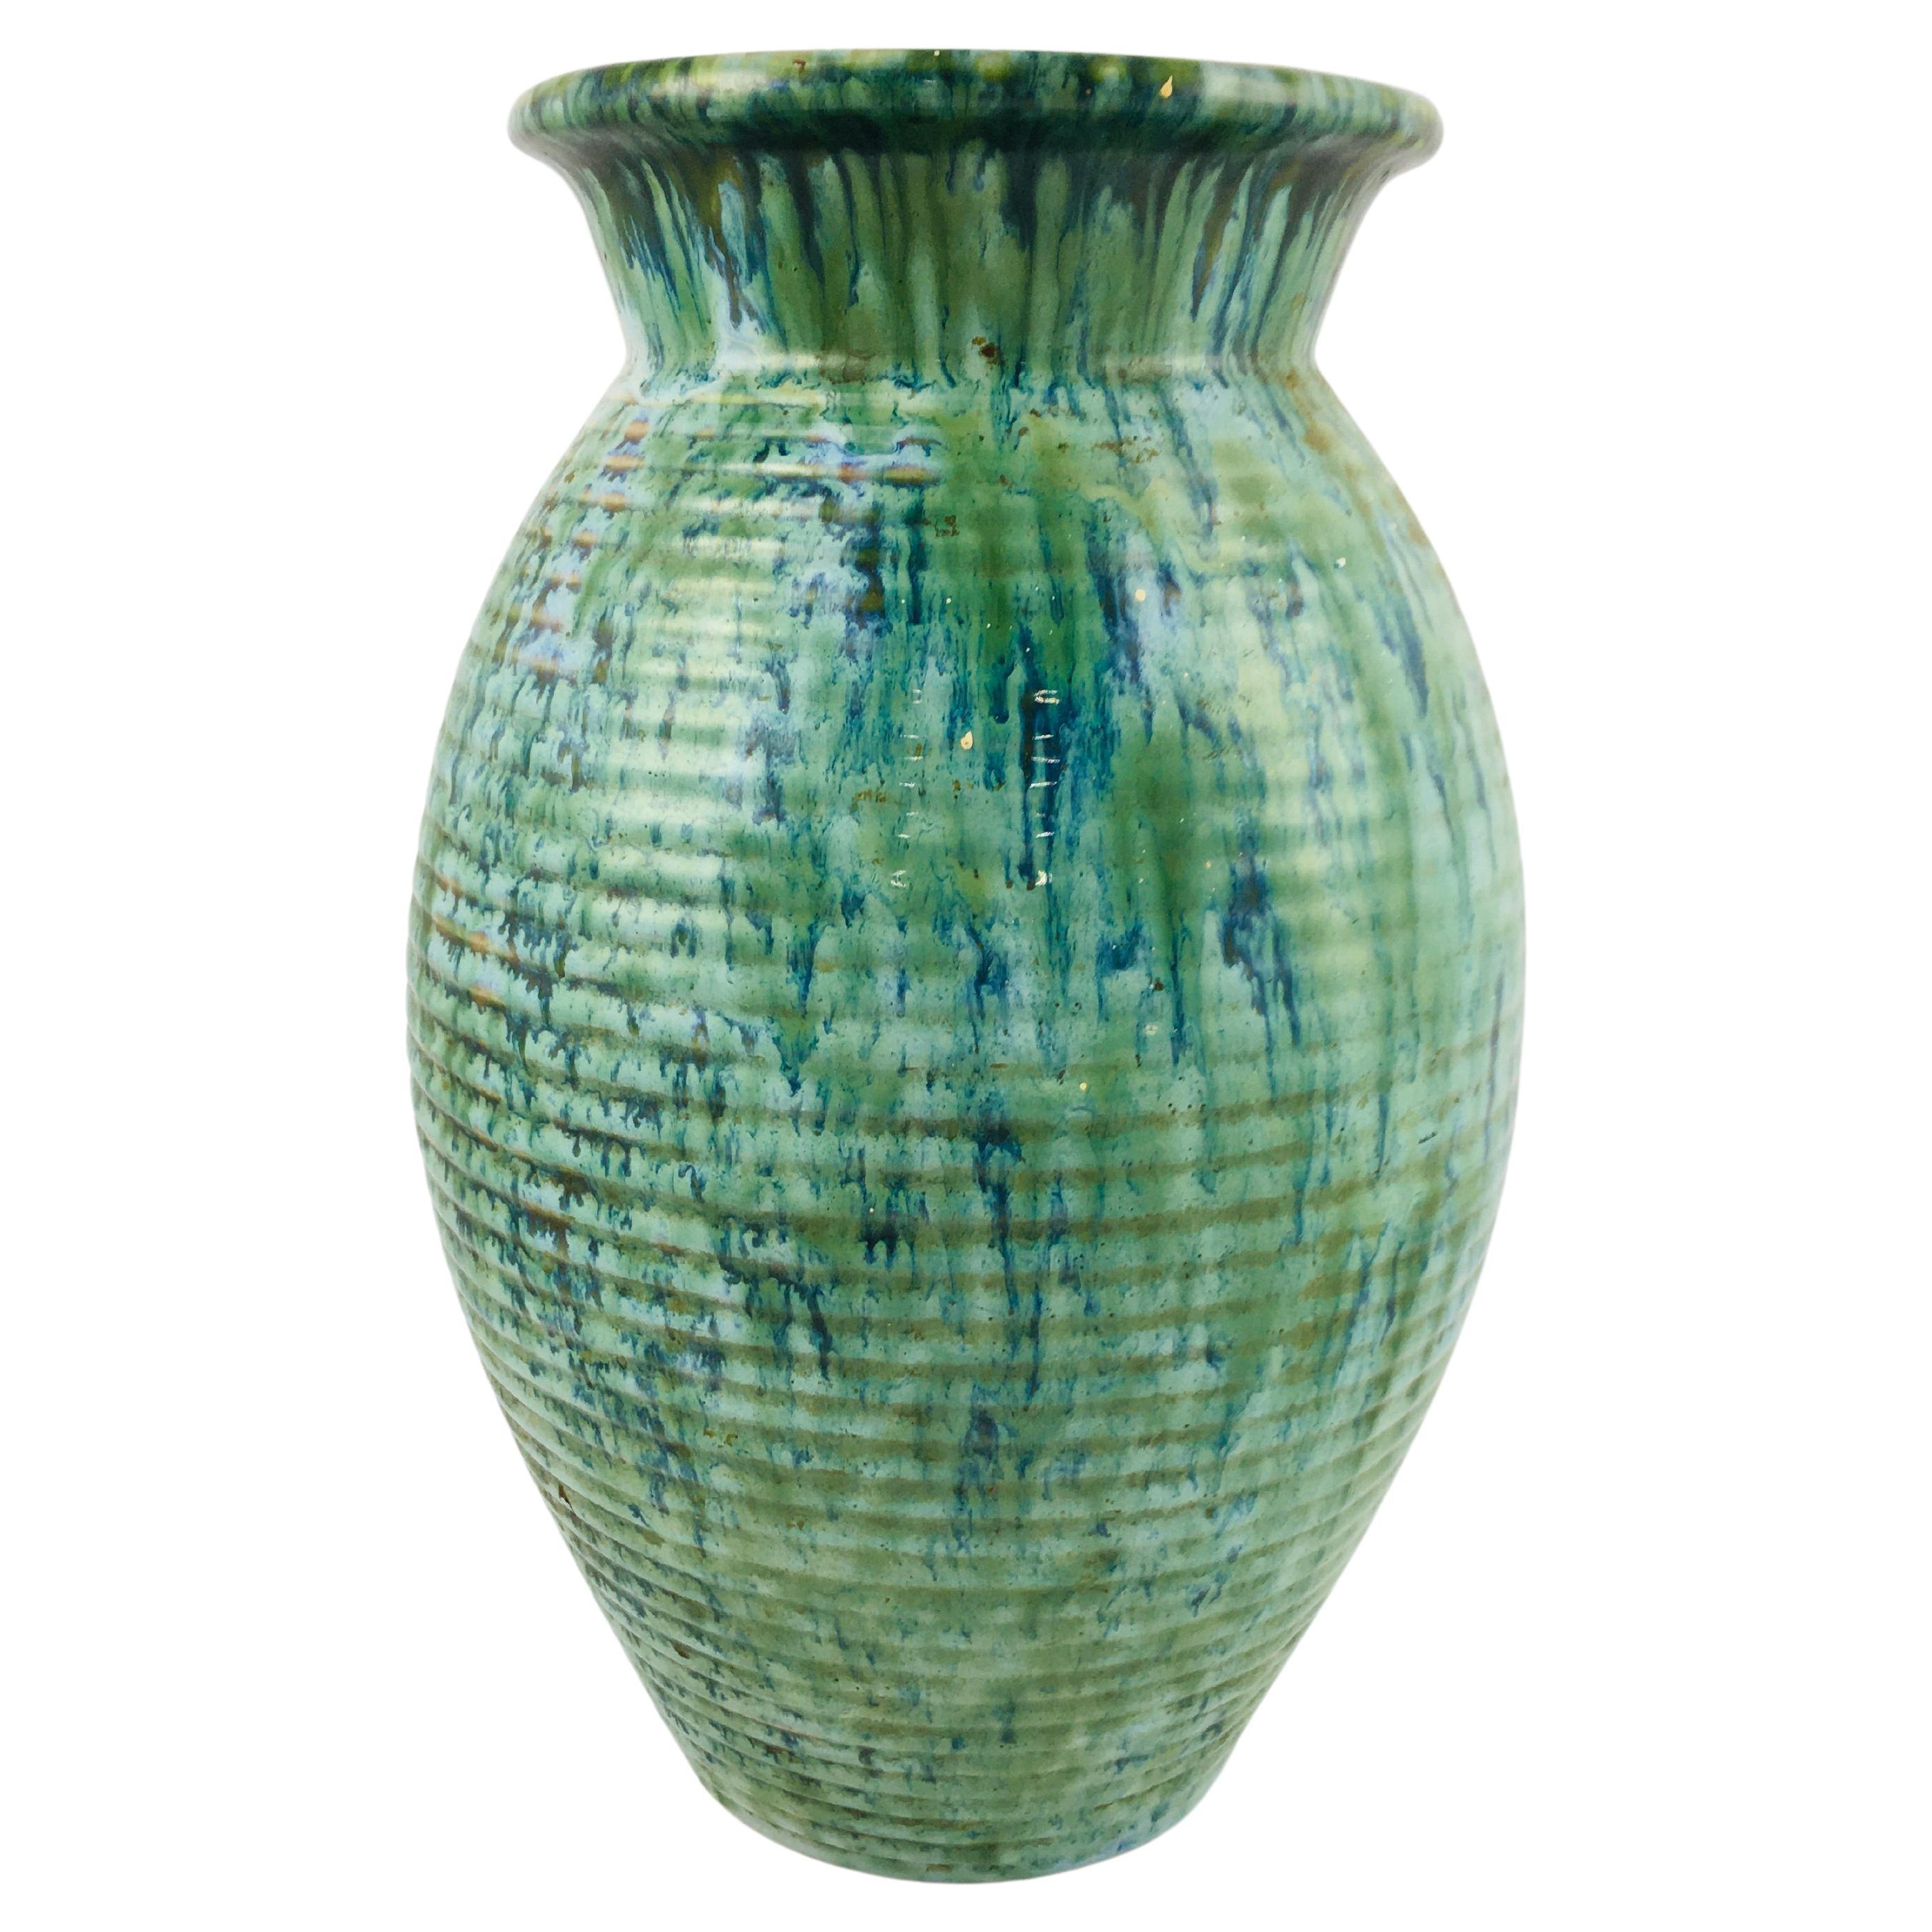 Large Green/Blue Marble Patterned Grooved Vase by Zsolnay from Hungary, 1930's